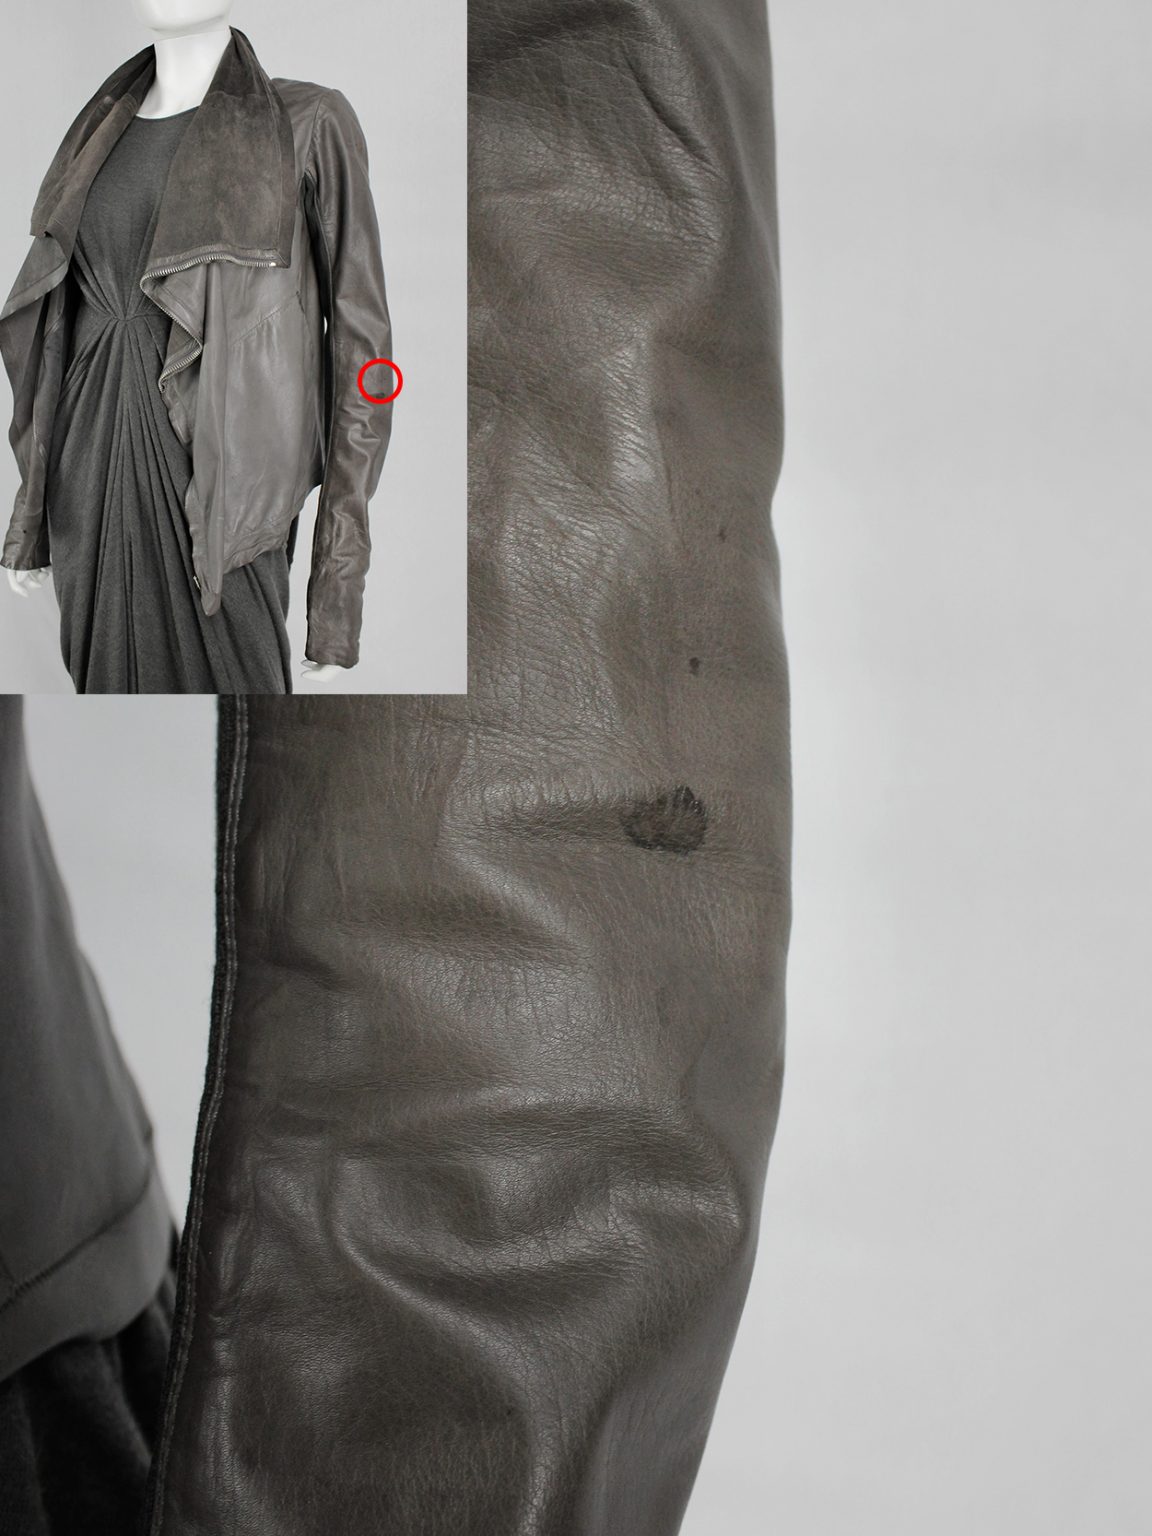 Rick Owens classic brown leather biker jacket with waterfall front